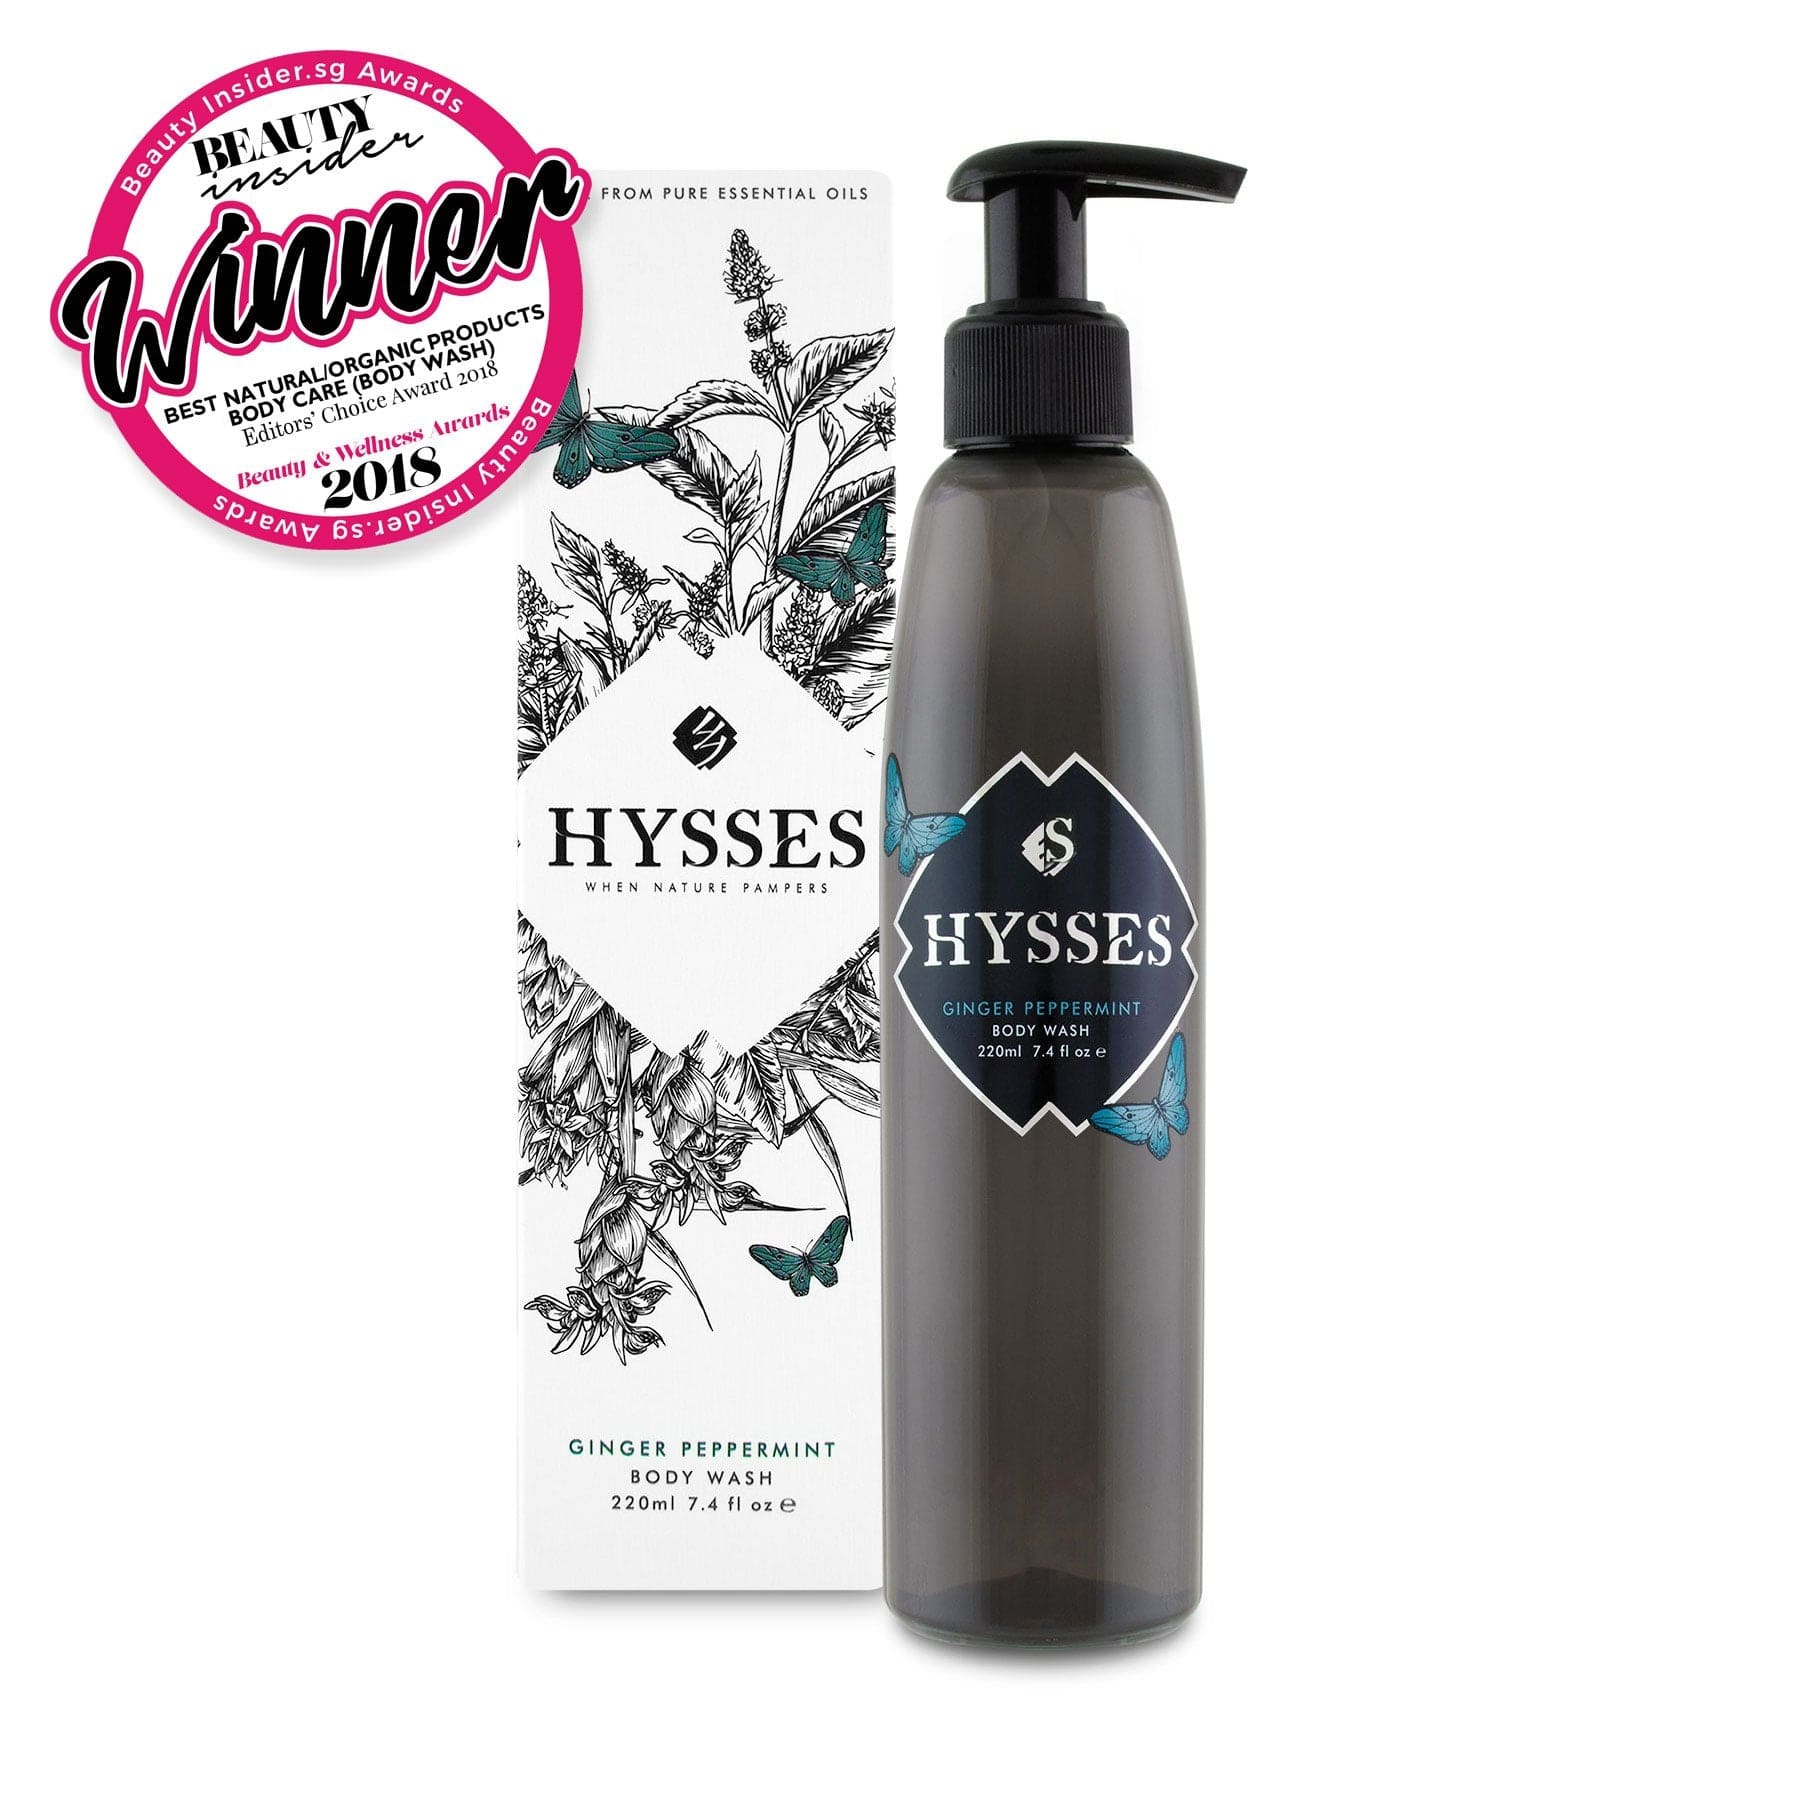 Hysses Body Care 220ml Body Wash Ginger Peppermint, 220ml